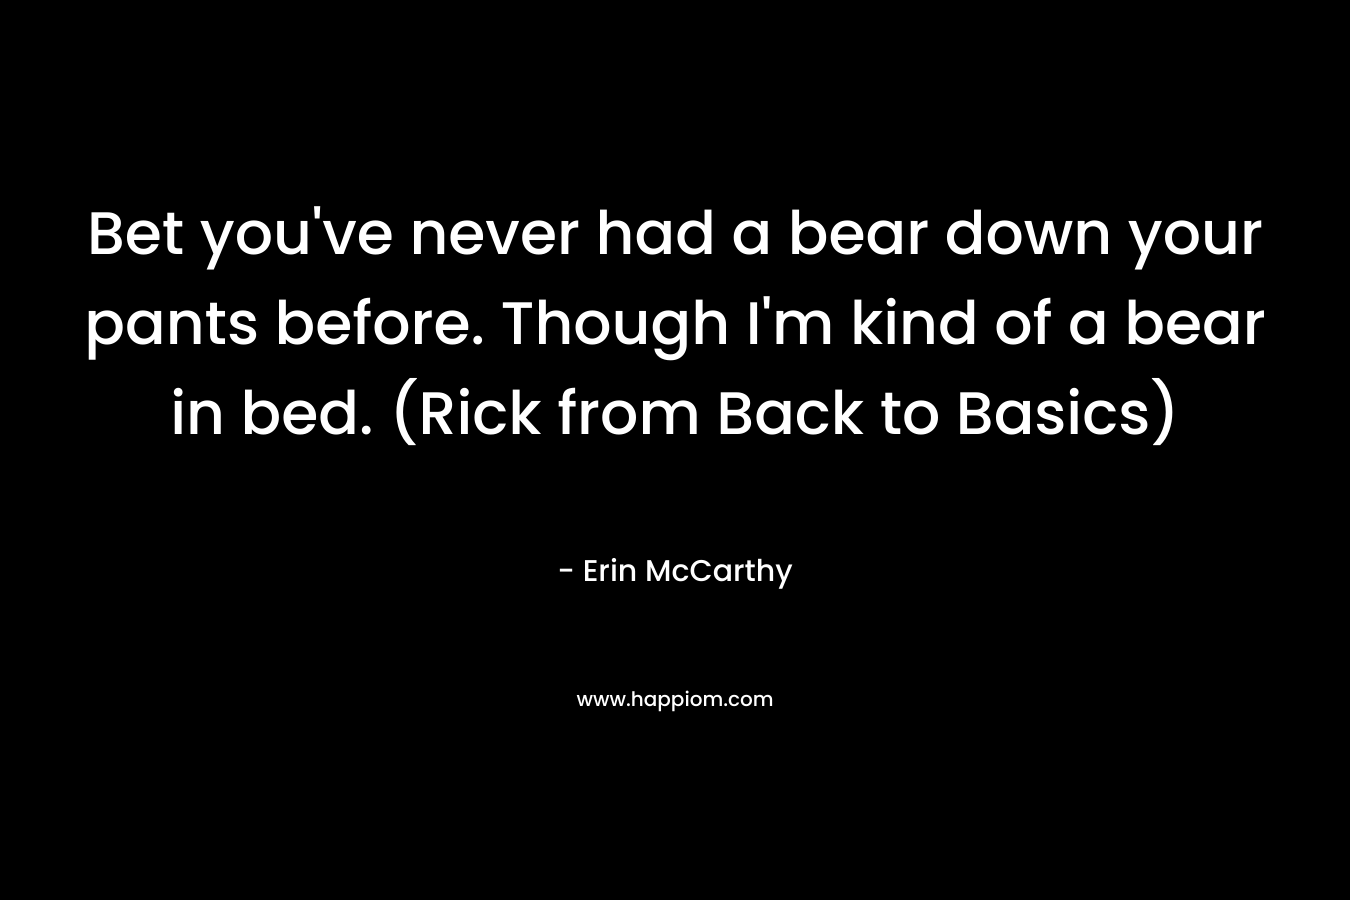 Bet you’ve never had a bear down your pants before. Though I’m kind of a bear in bed. (Rick from Back to Basics) – Erin McCarthy